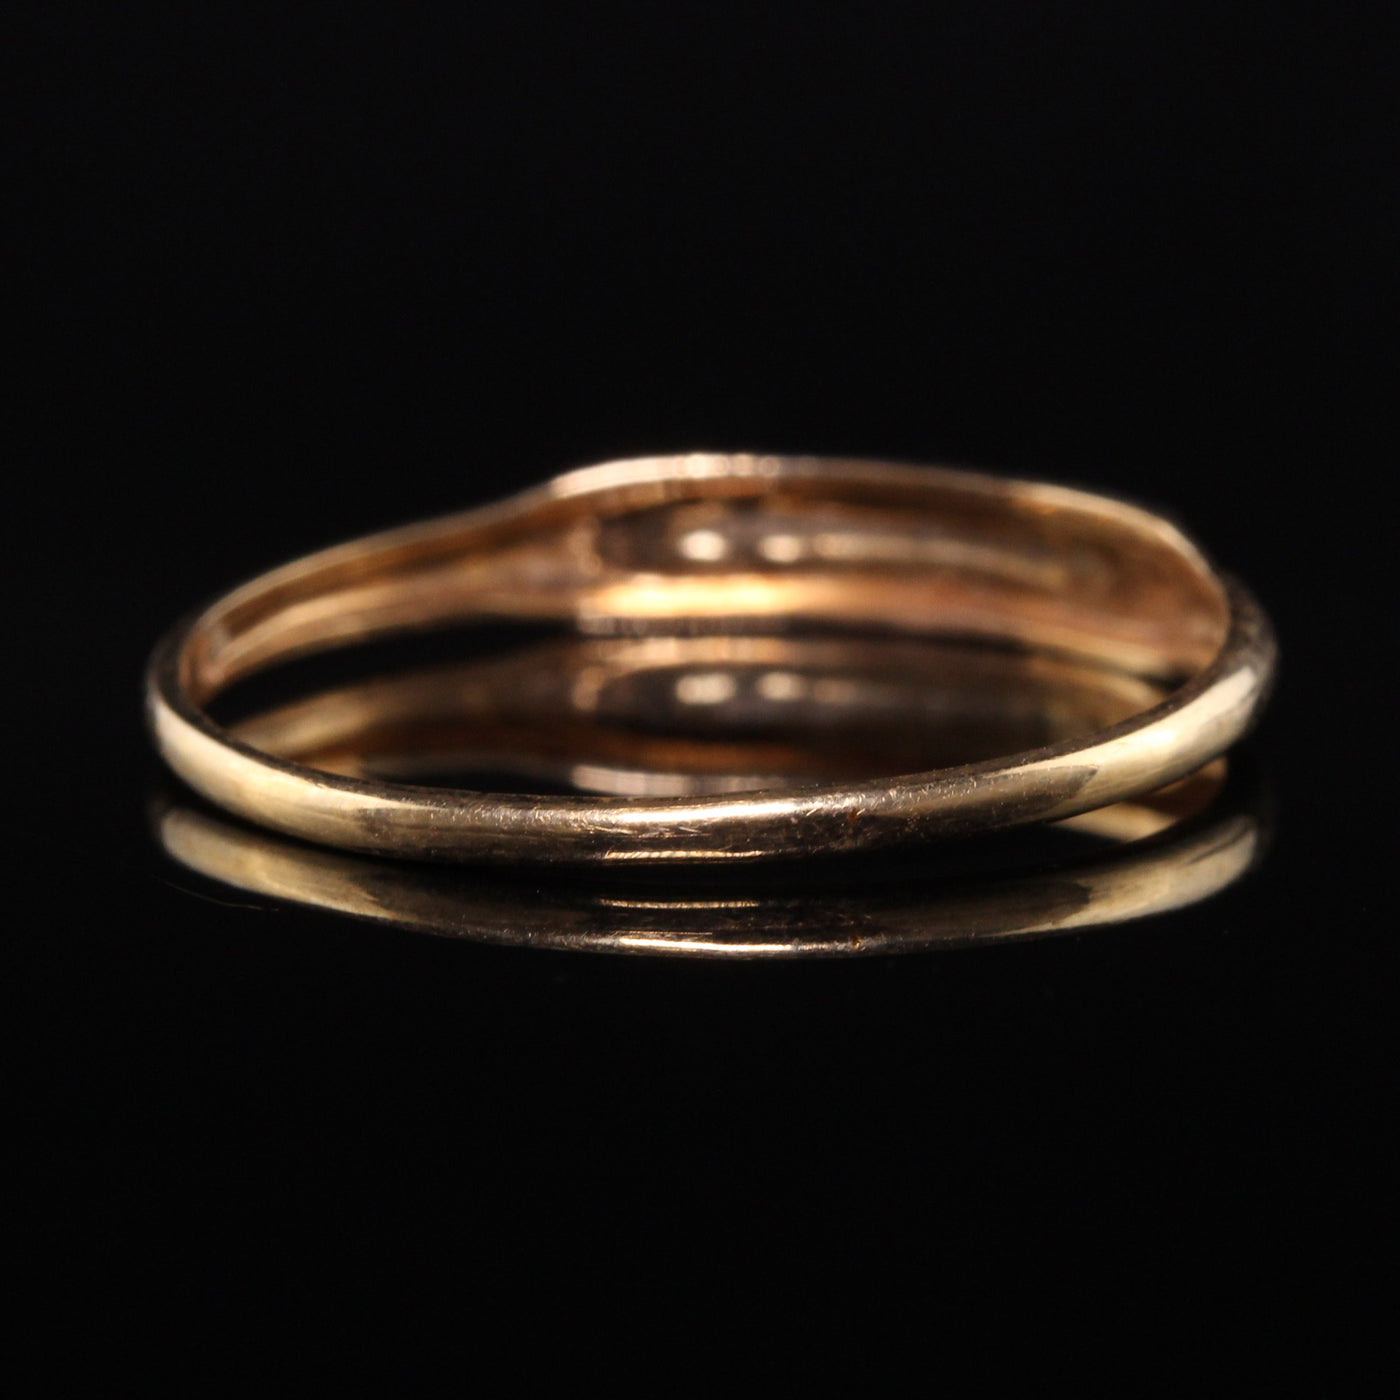 Antique Art Deco 14K Yellow Gold Two Tone Engraved Wedding Band - Size 6 1/4